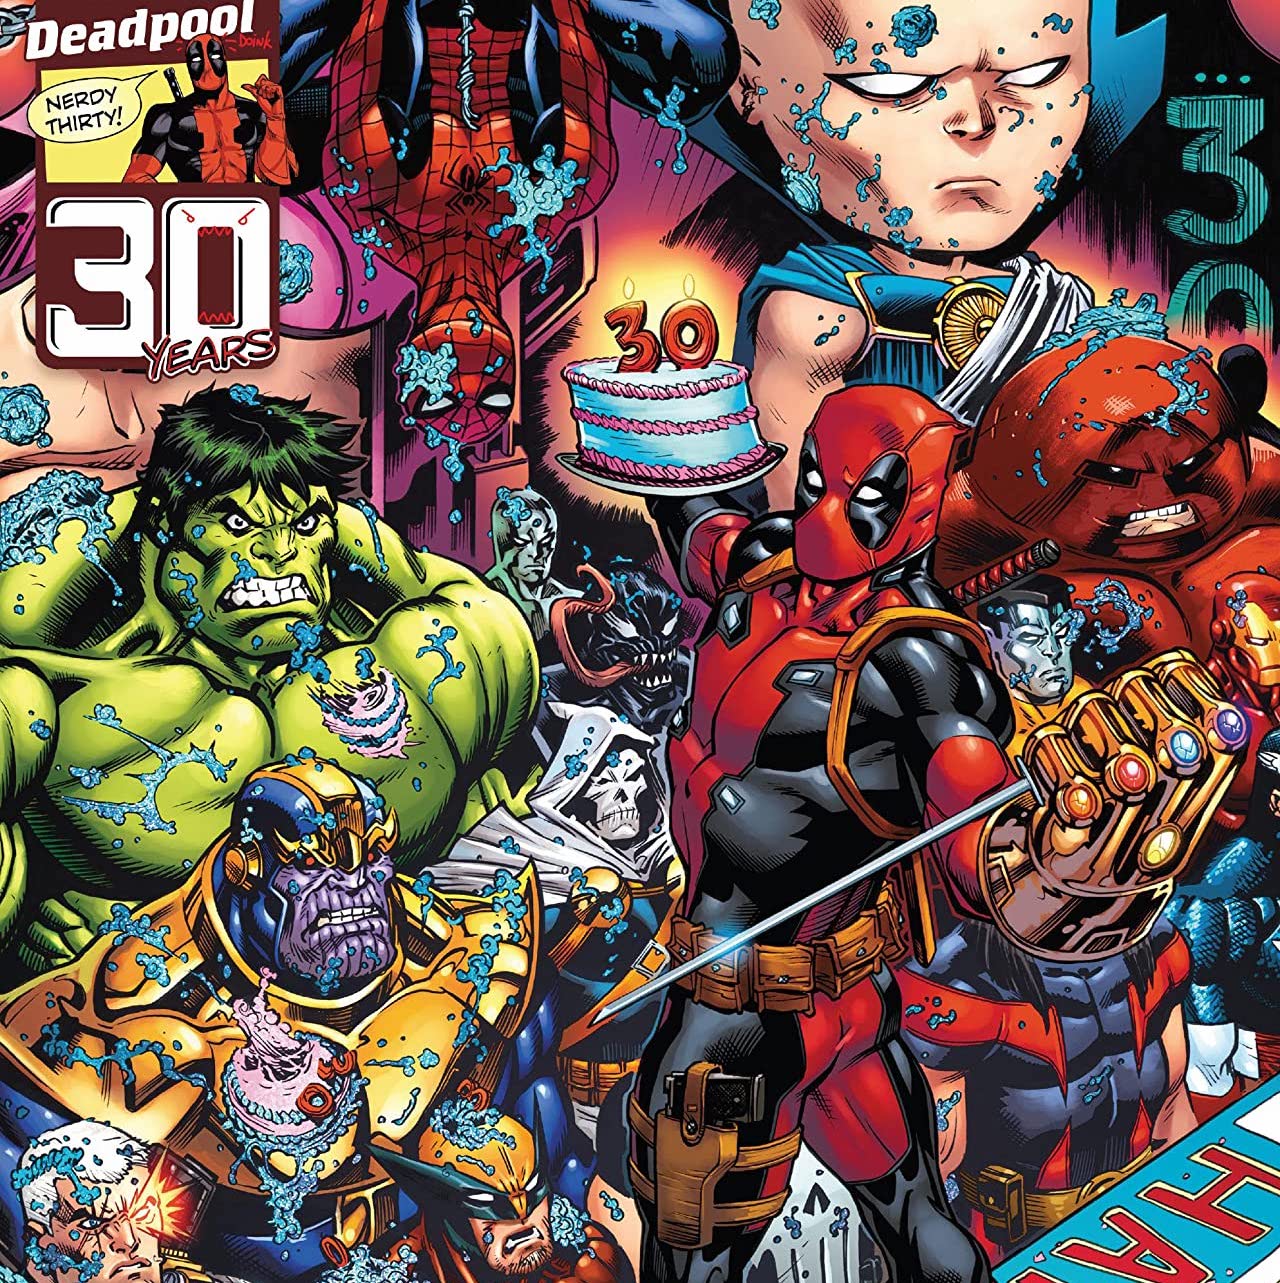 EXCLUSIVE Marvel Preview: Deadpool Nerdy 30 #1